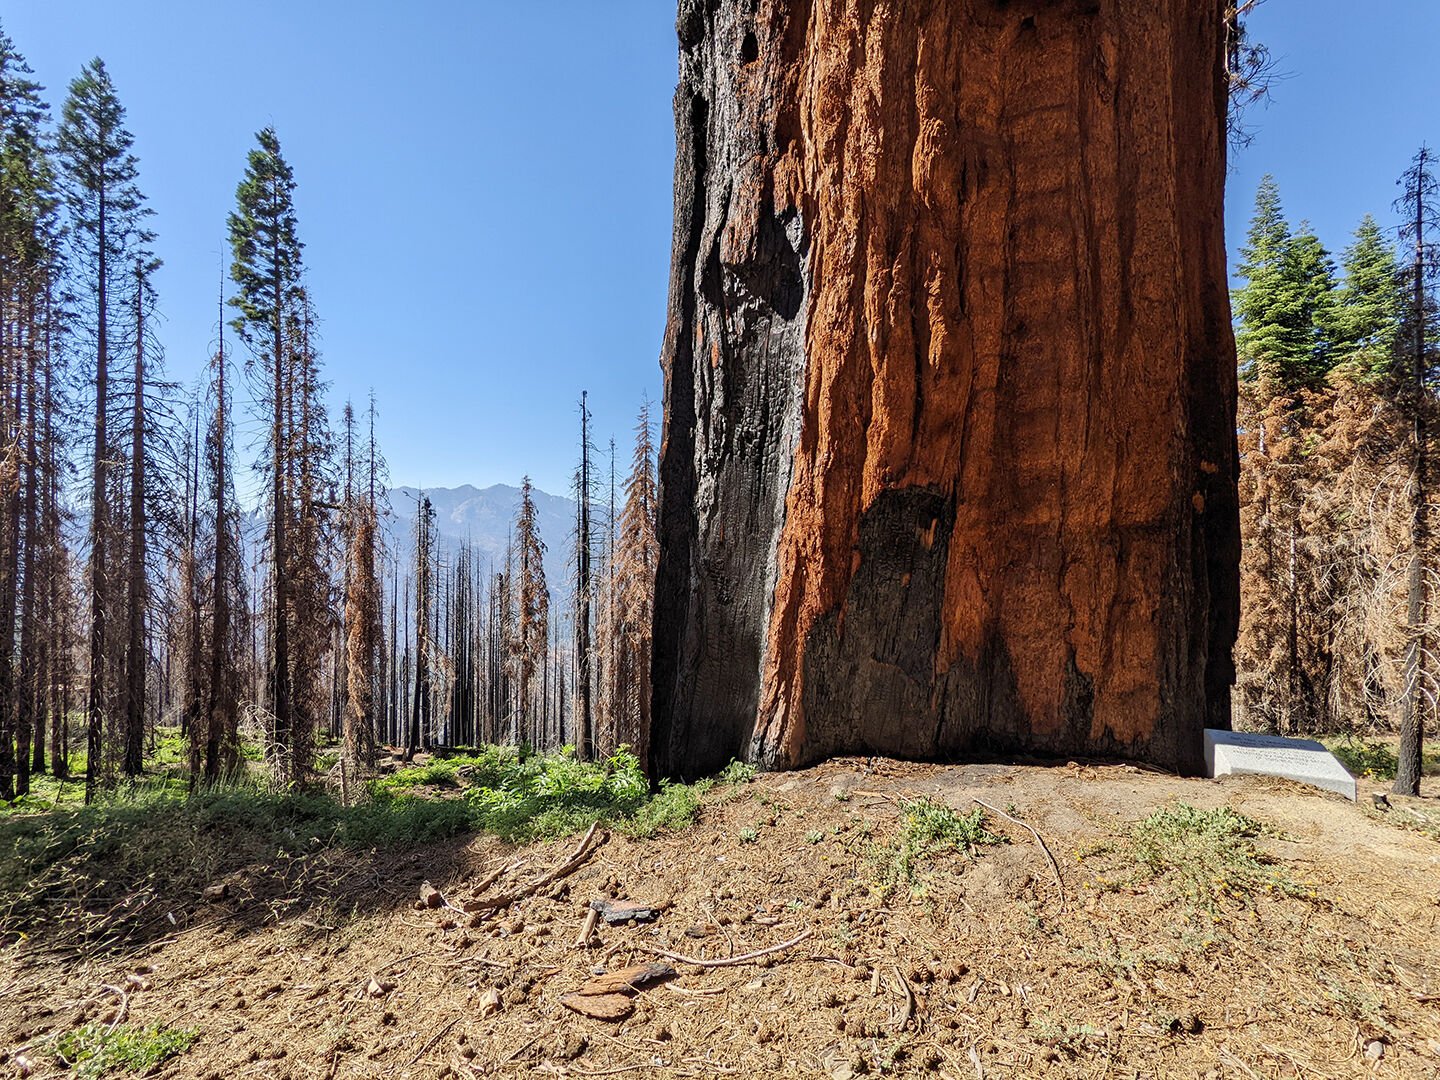 Castle Fire of 2020 continues to impact giant sequoia trees and